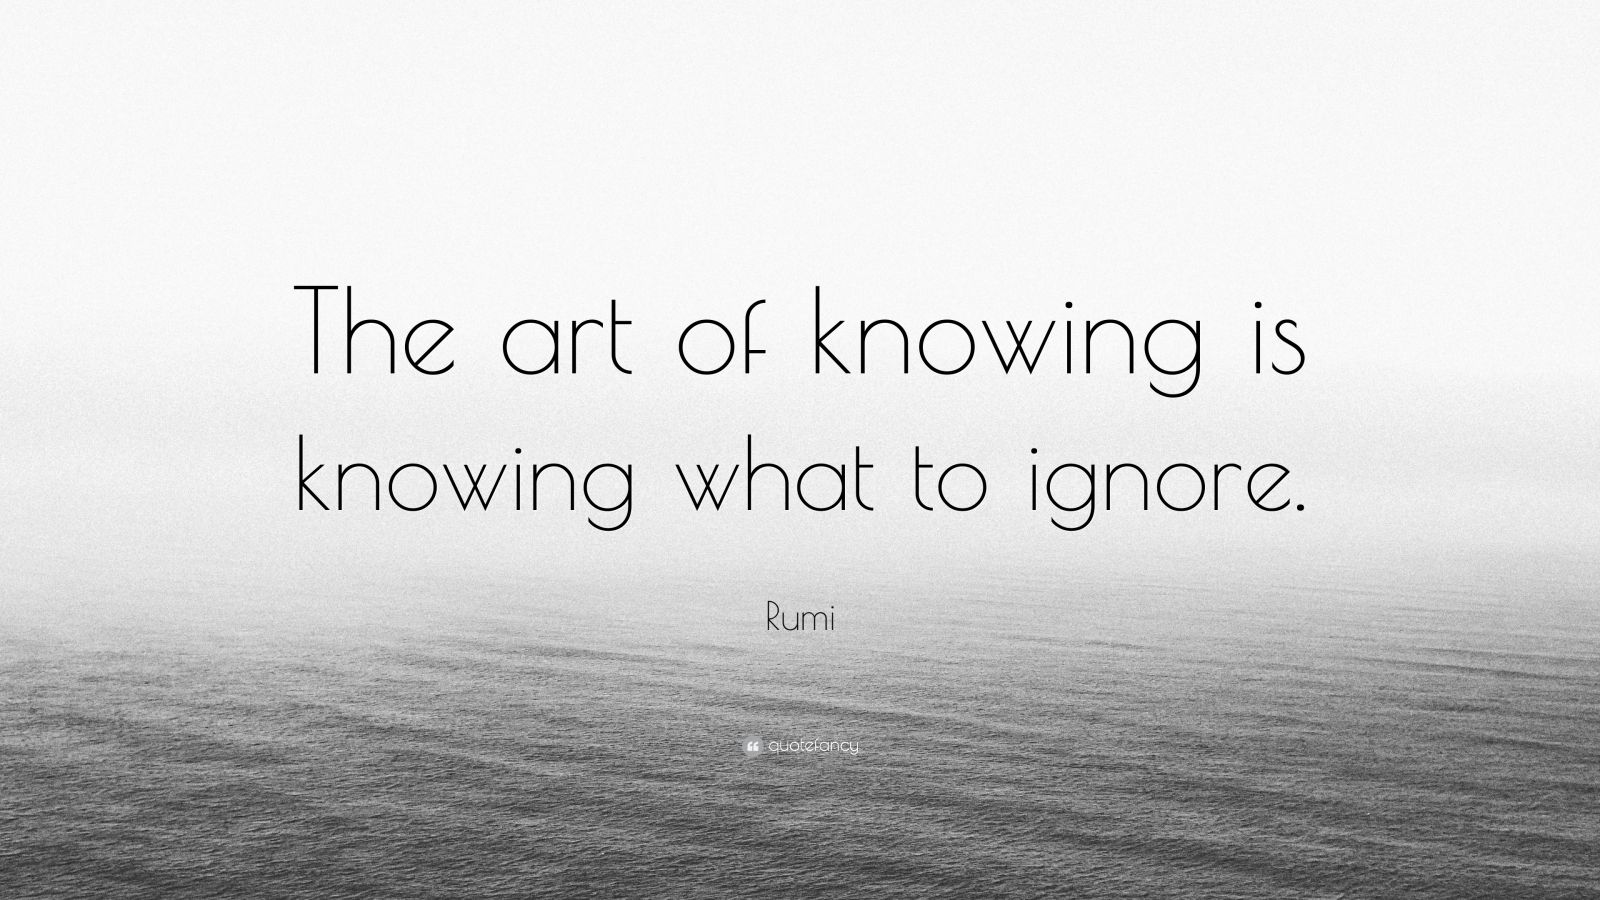 The Great Art of Knowing by Daniel Stolzenberg